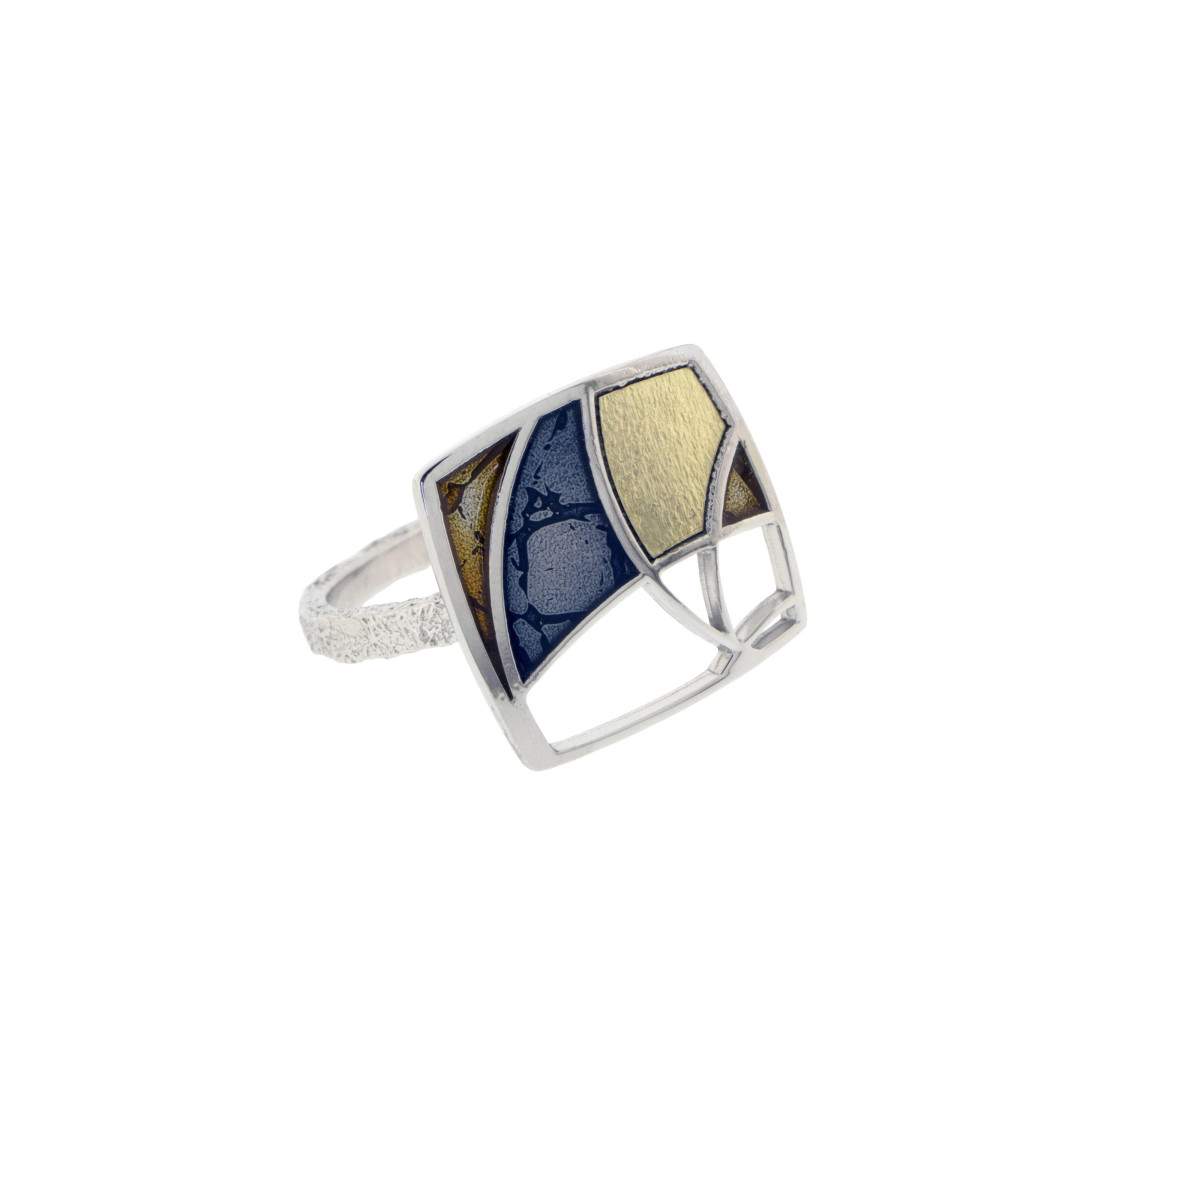 Silver and gold ring, enameled.